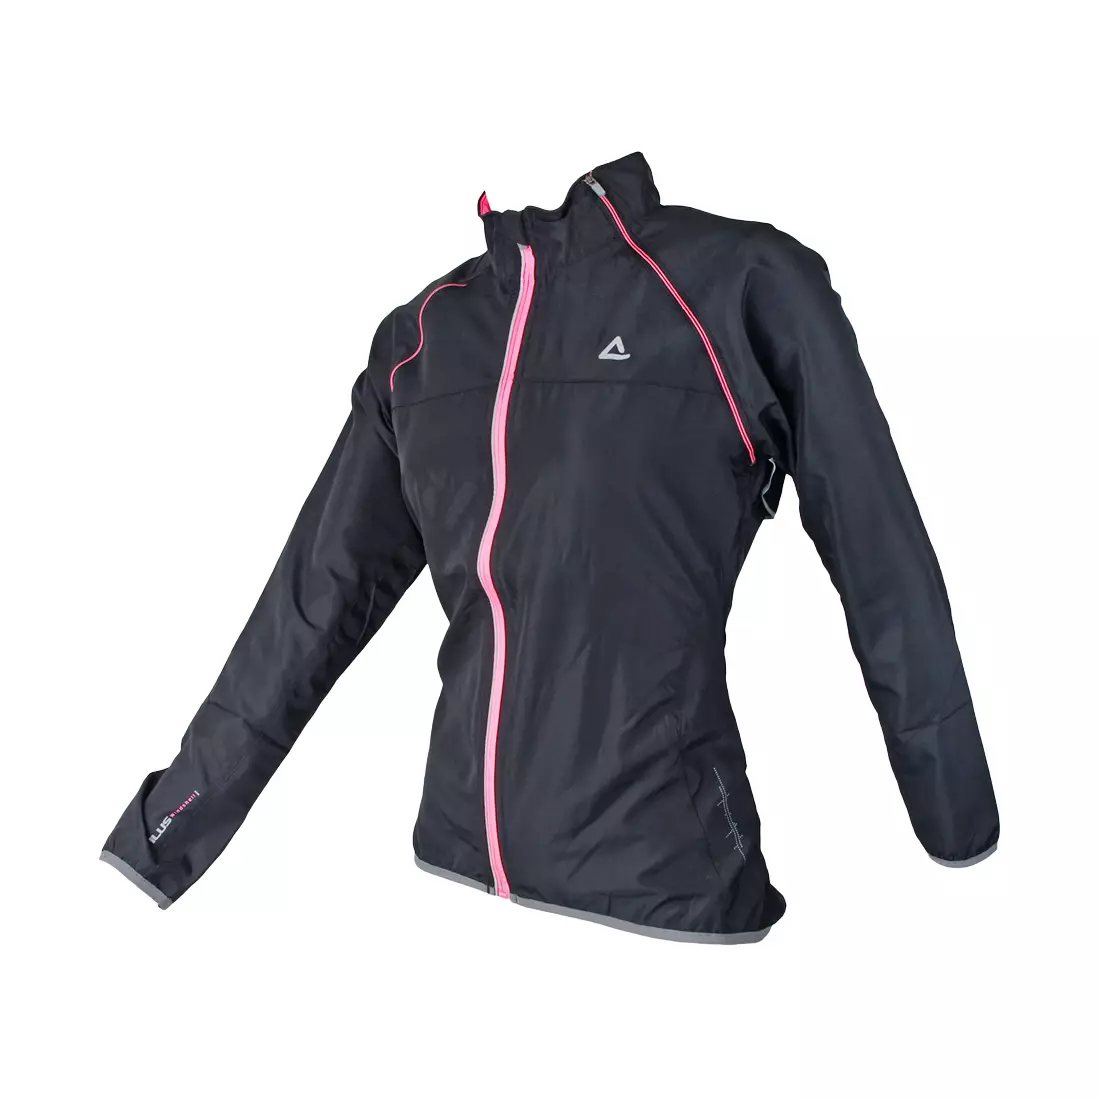 DARE 2B - SCURRIED WINDSHELL DWL070 - women's cycling jacket-vest, color: Black